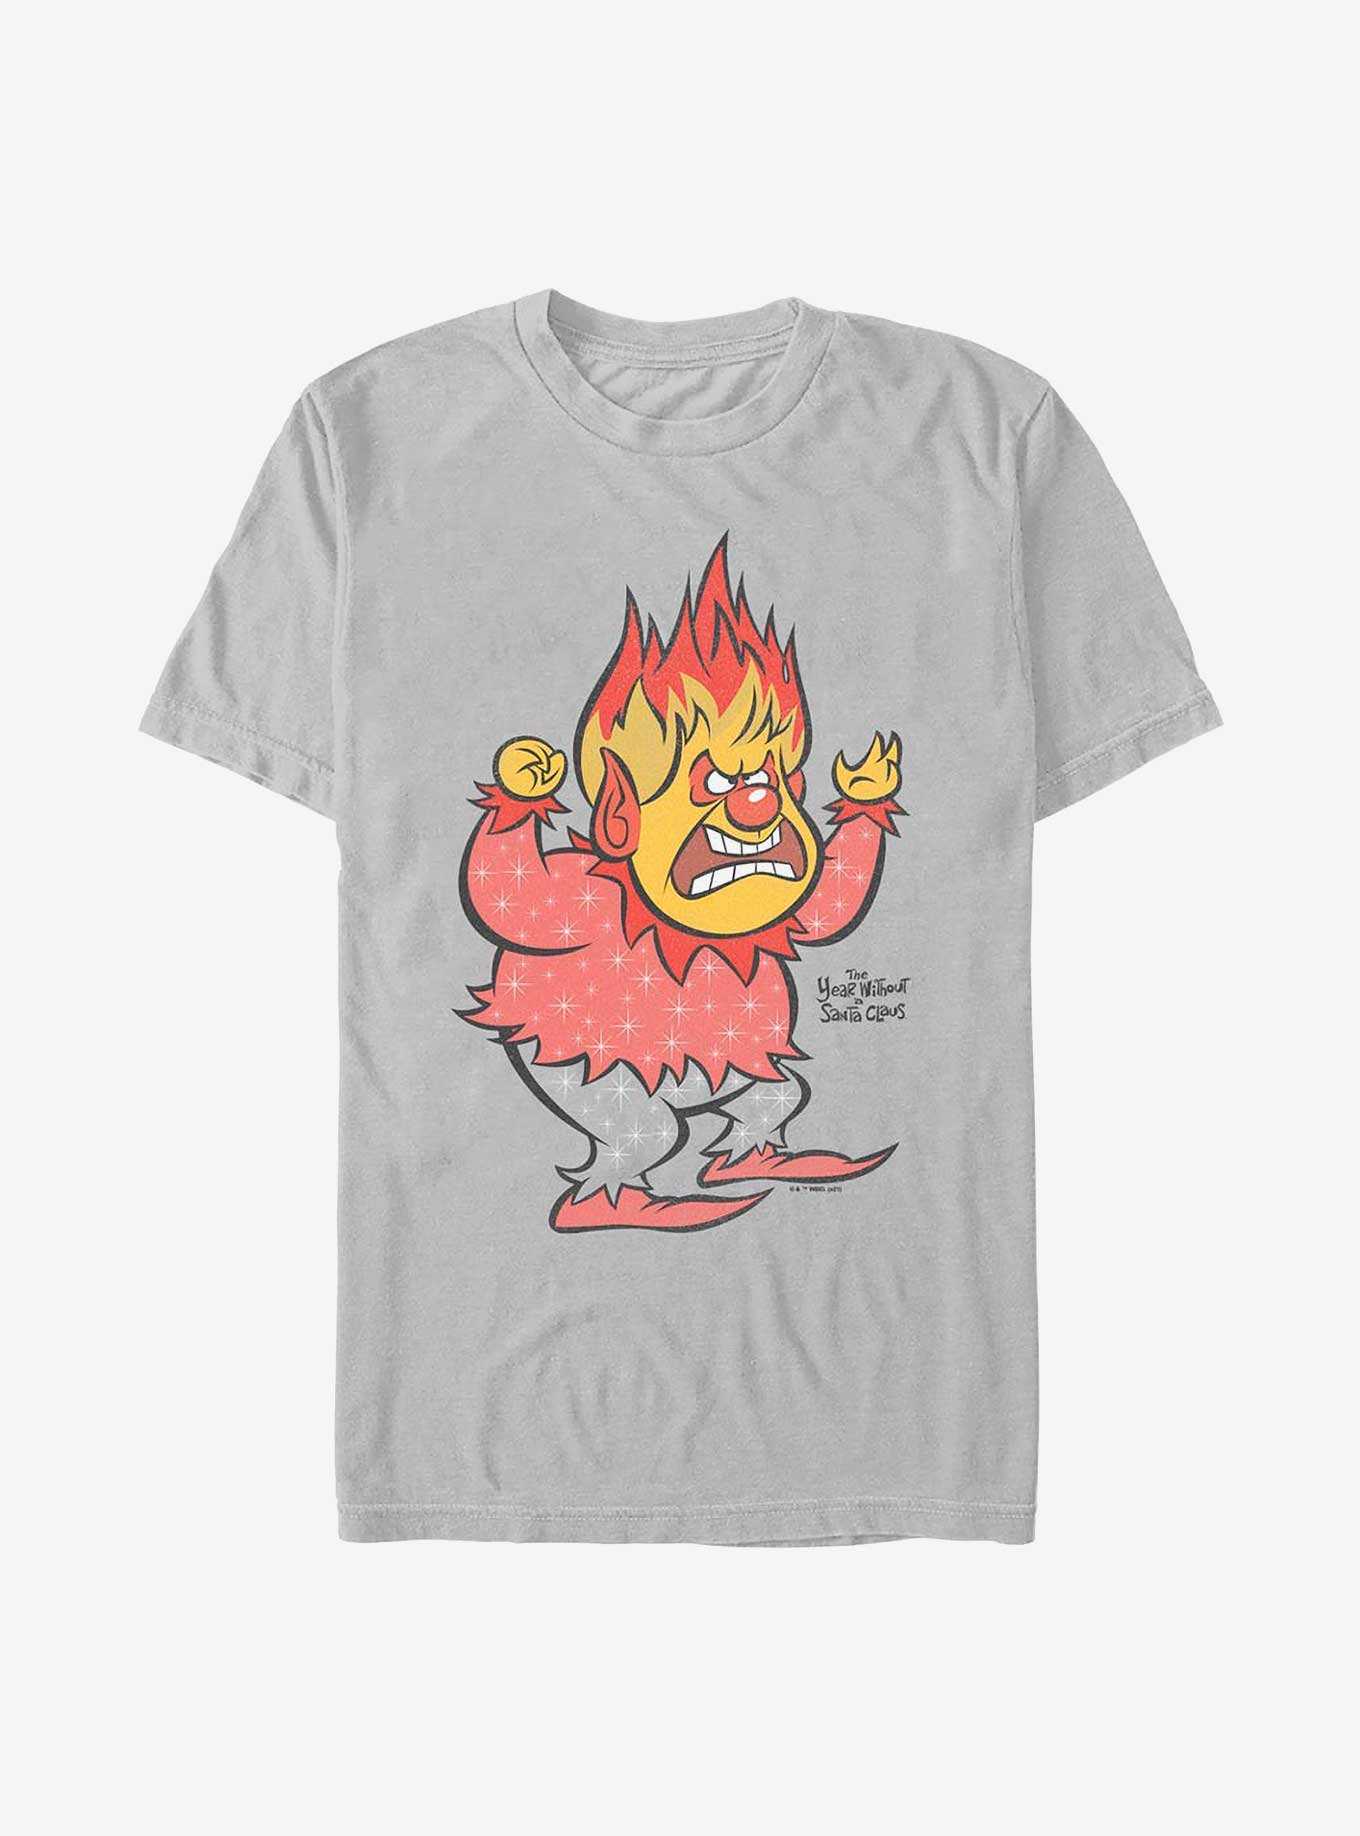 The Year Without Santa Claus Vintage Heat Miser T-Shirt, , hi-res